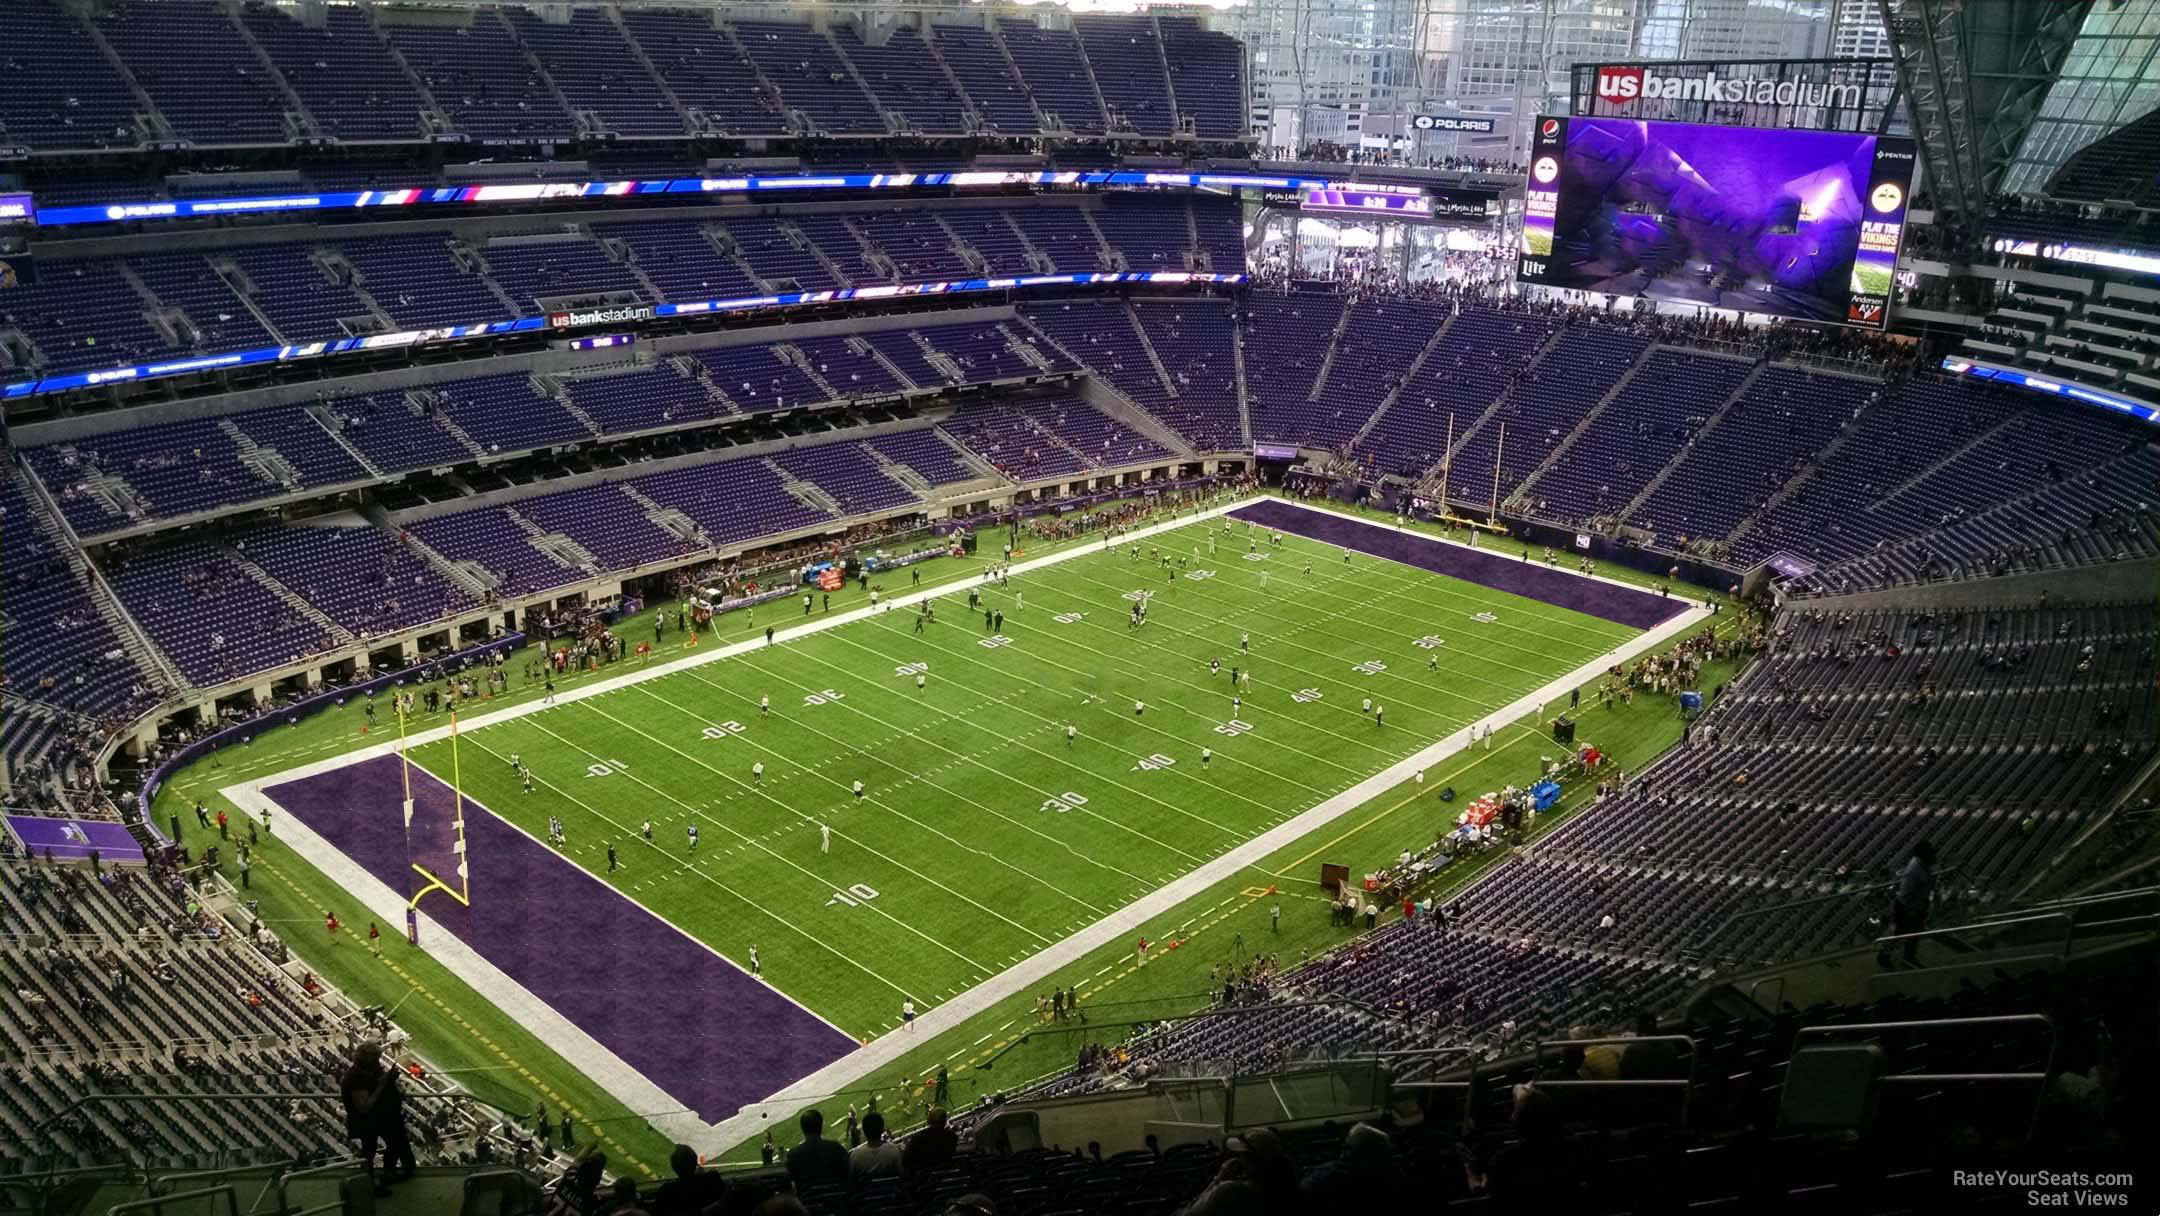 section 319, row 15 seat view  for football - u.s. bank stadium